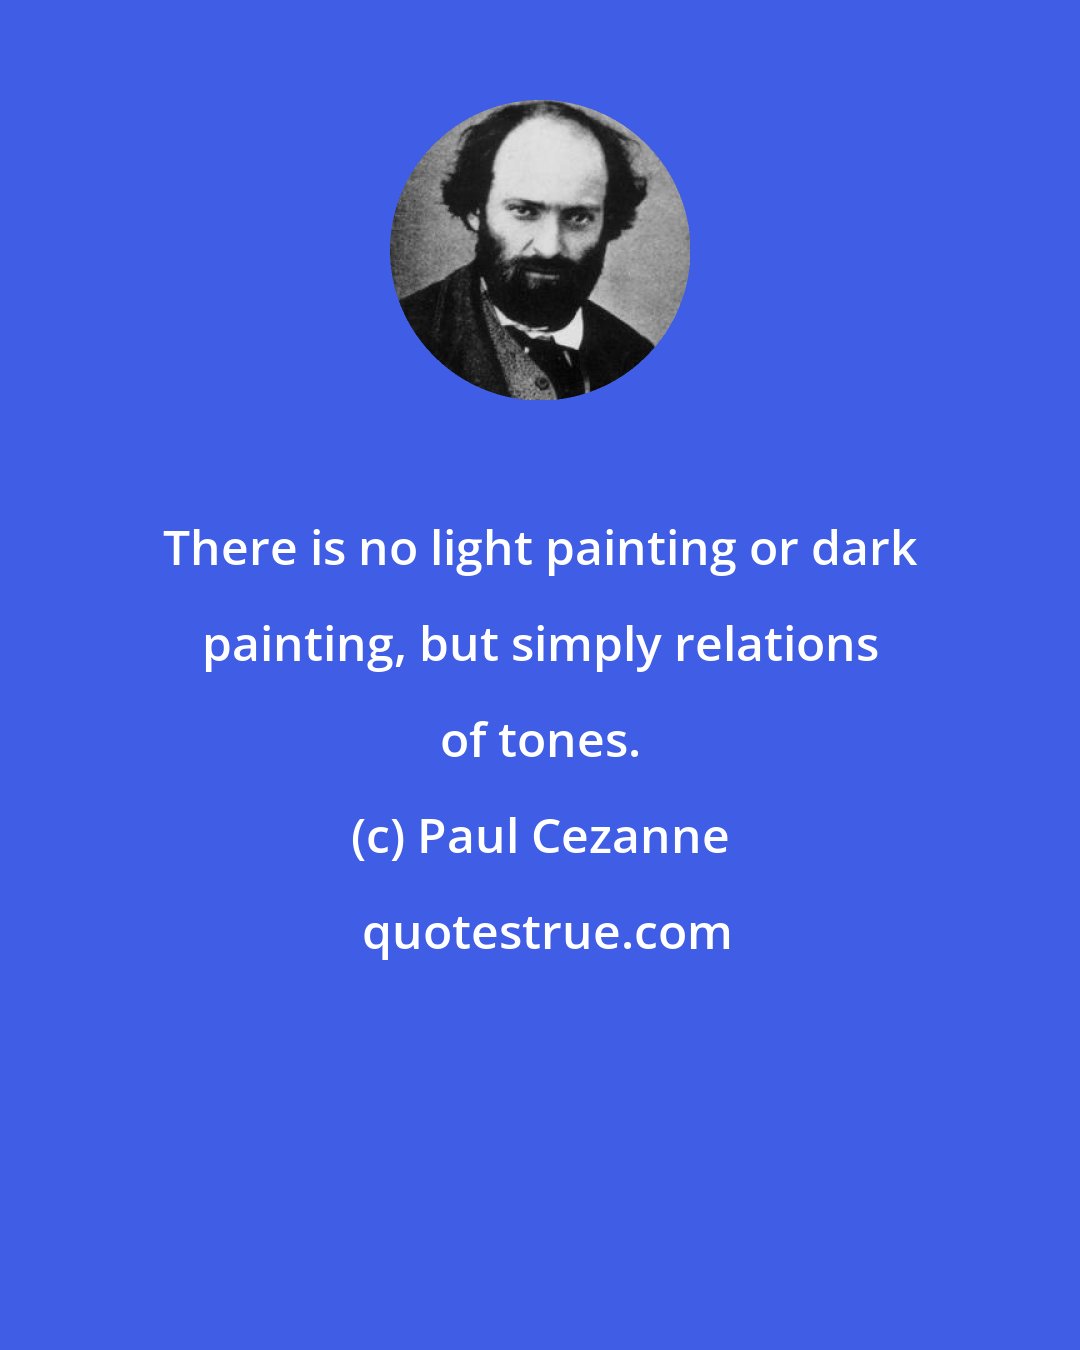 Paul Cezanne: There is no light painting or dark painting, but simply relations of tones.